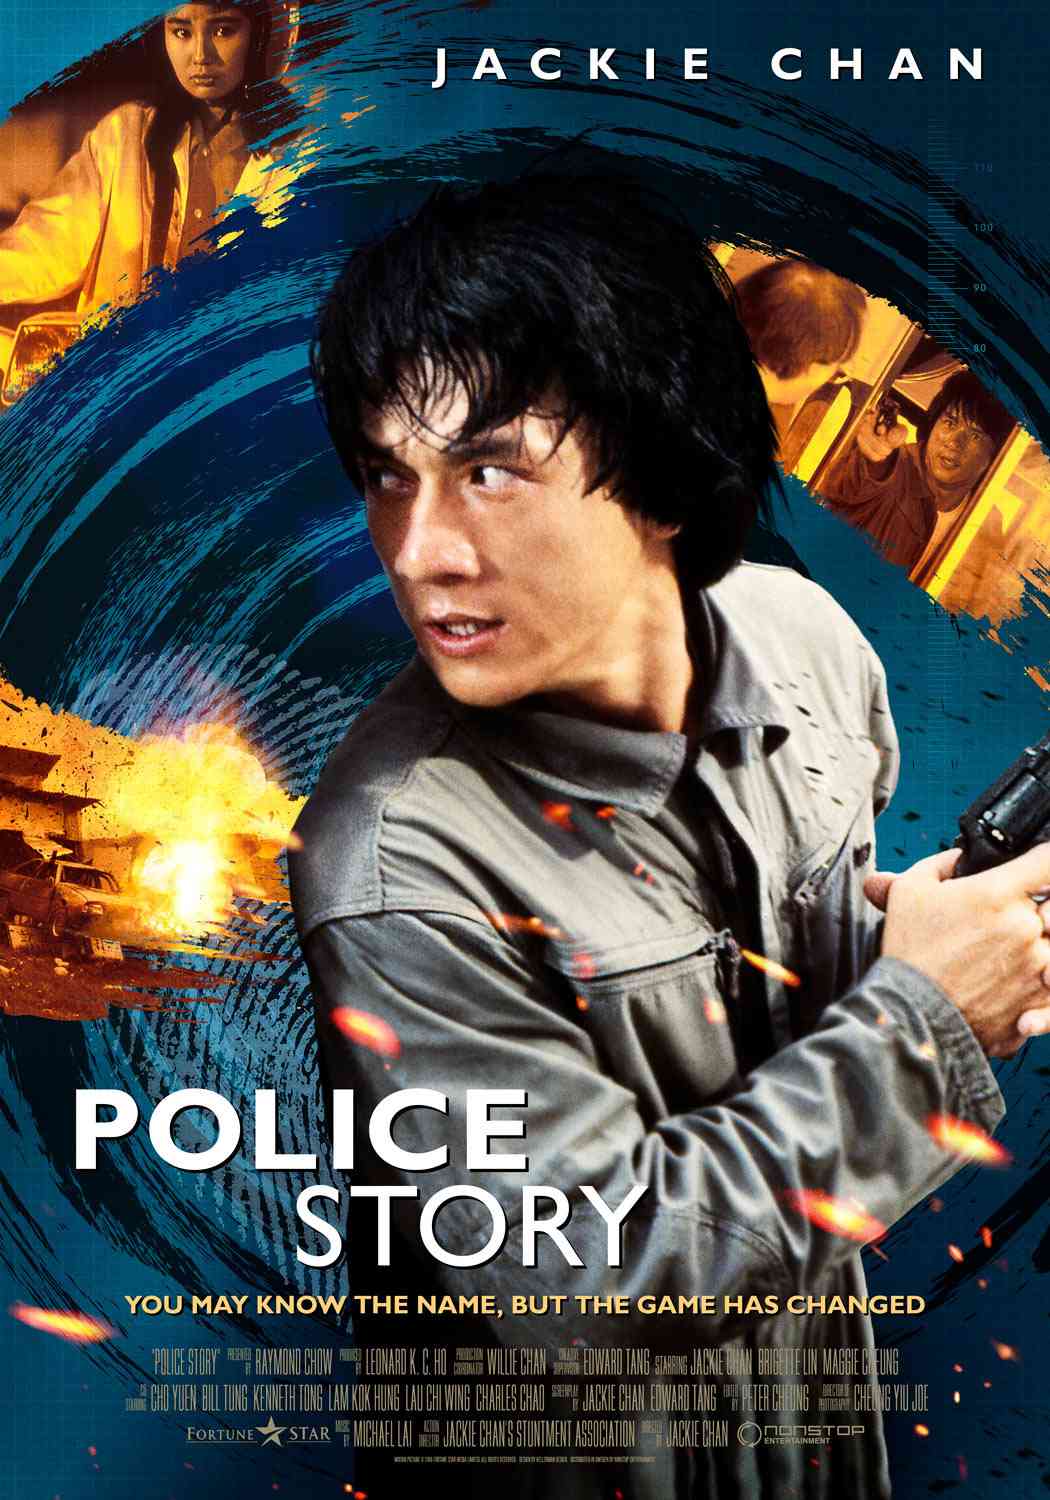 FULL MOVIE: Police Story (1985) [Action]